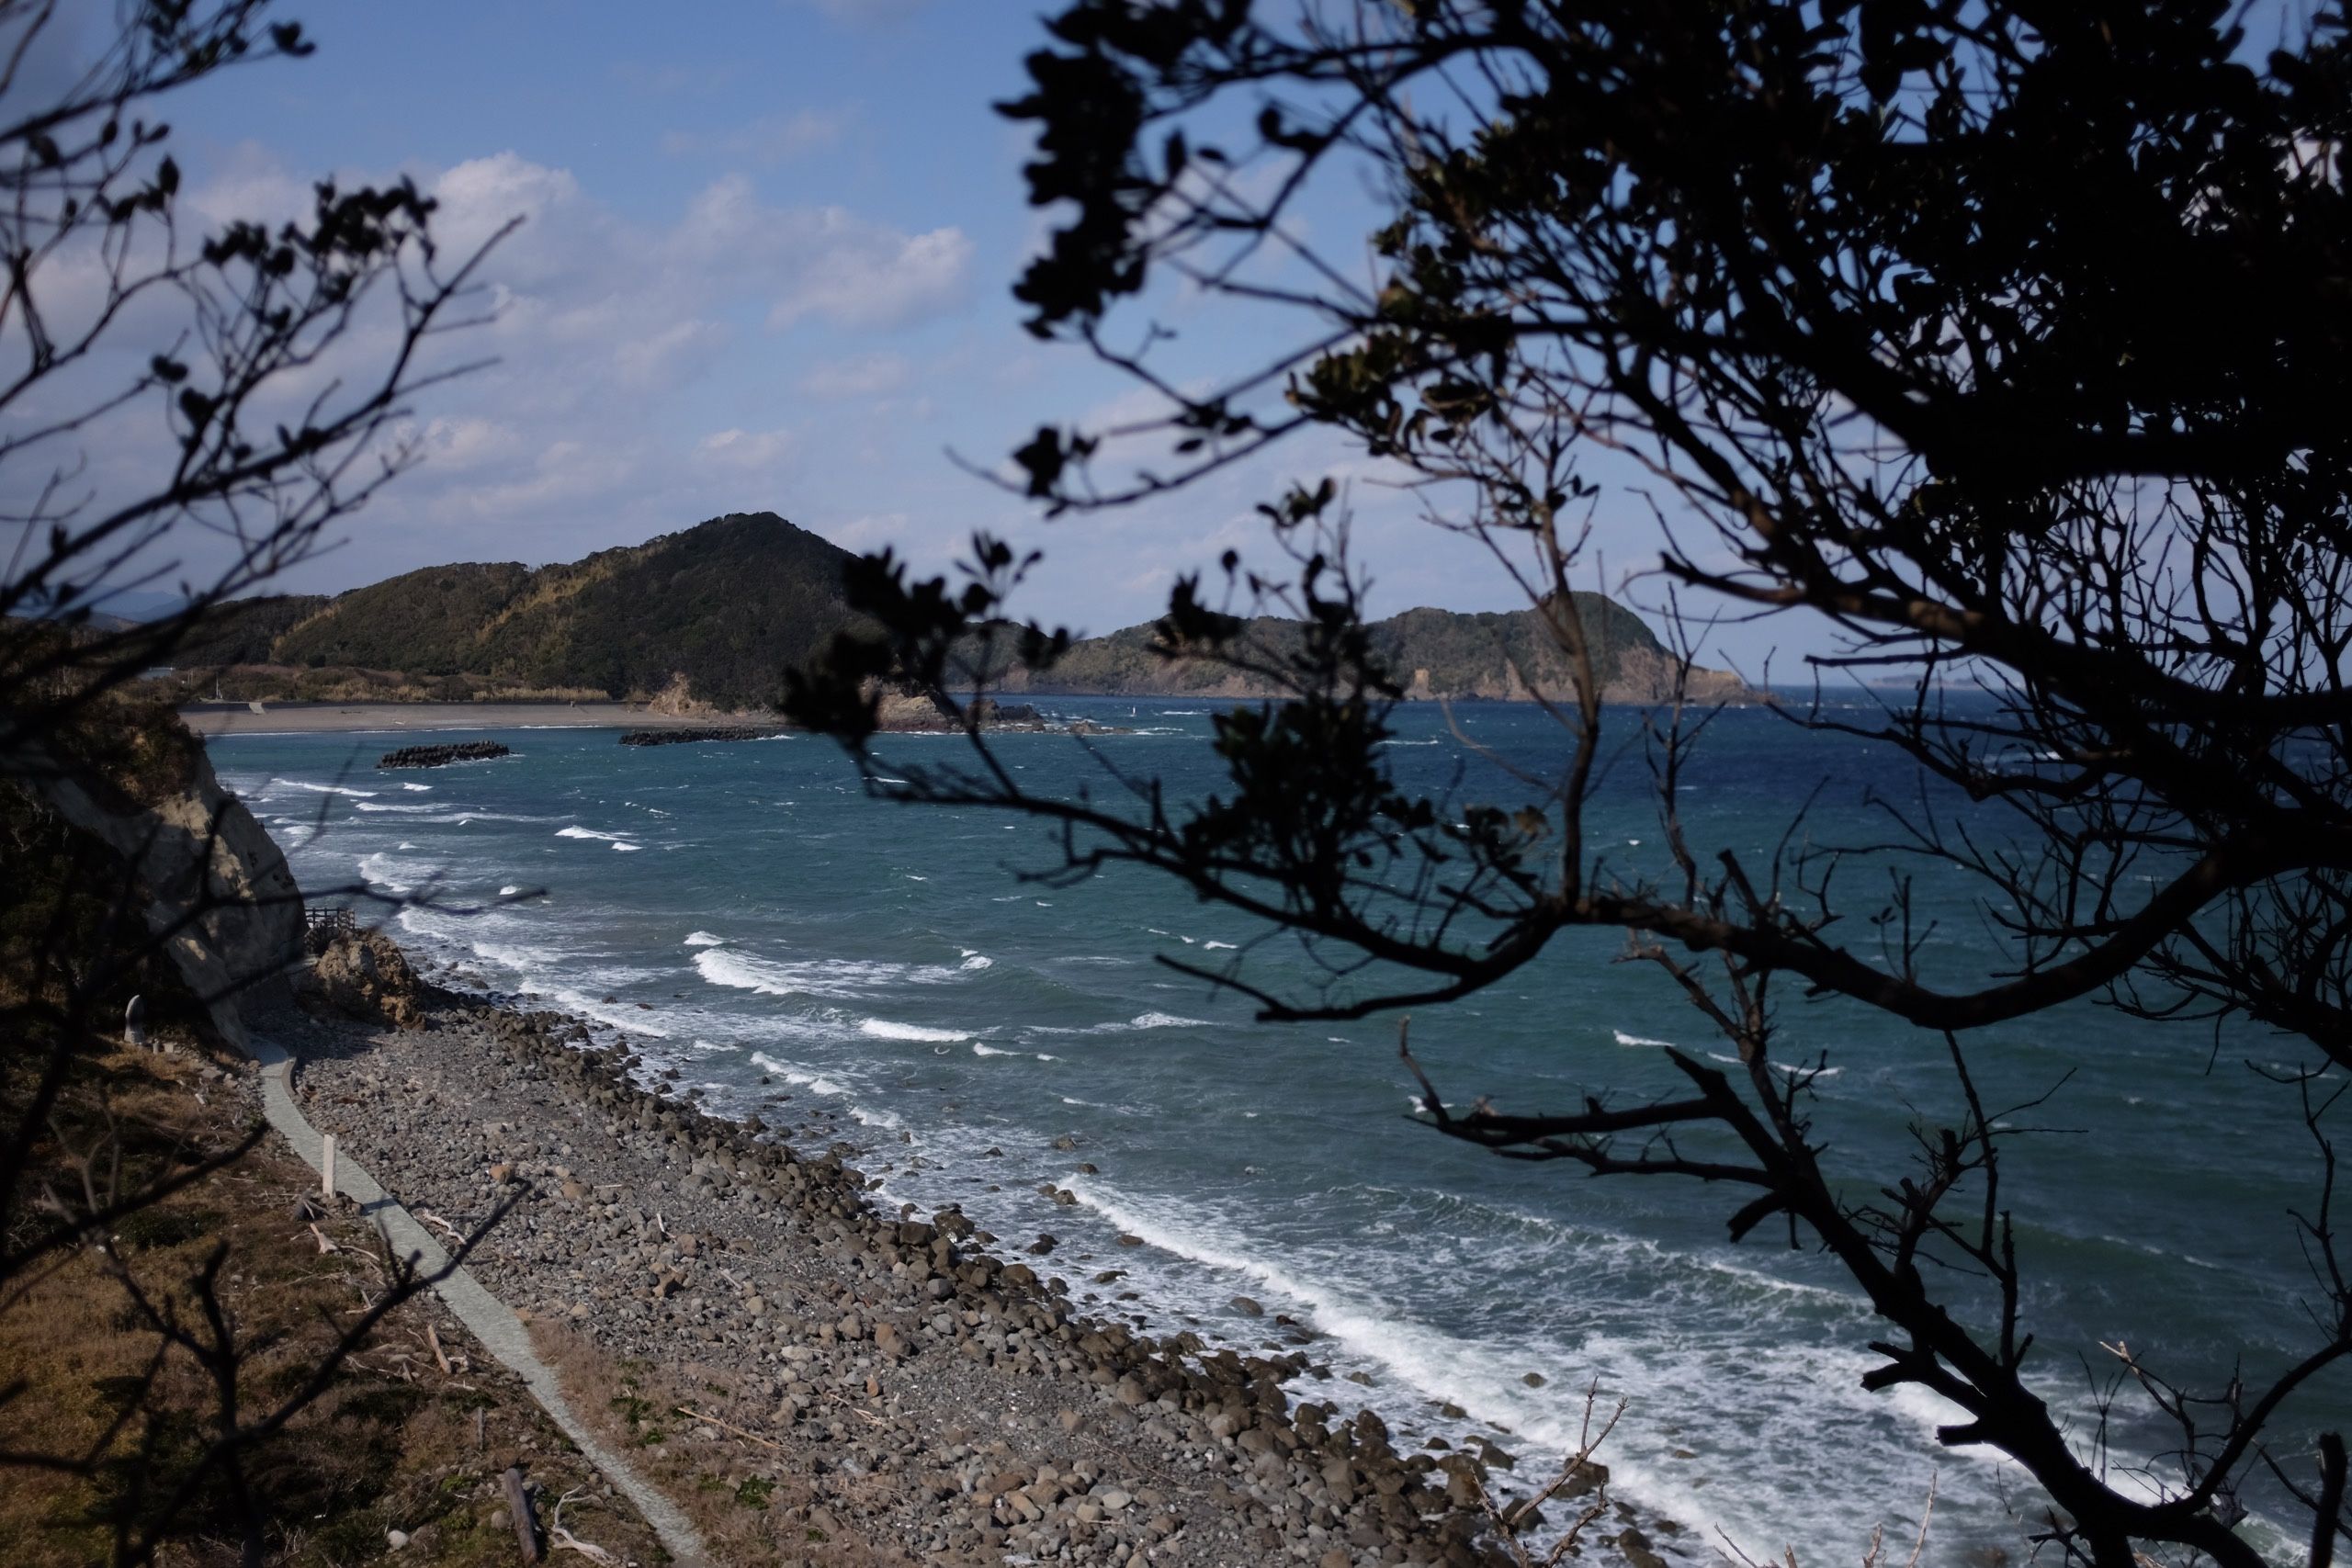 A rocky beach as seen from between small trees, with more forested hills on the horizon.